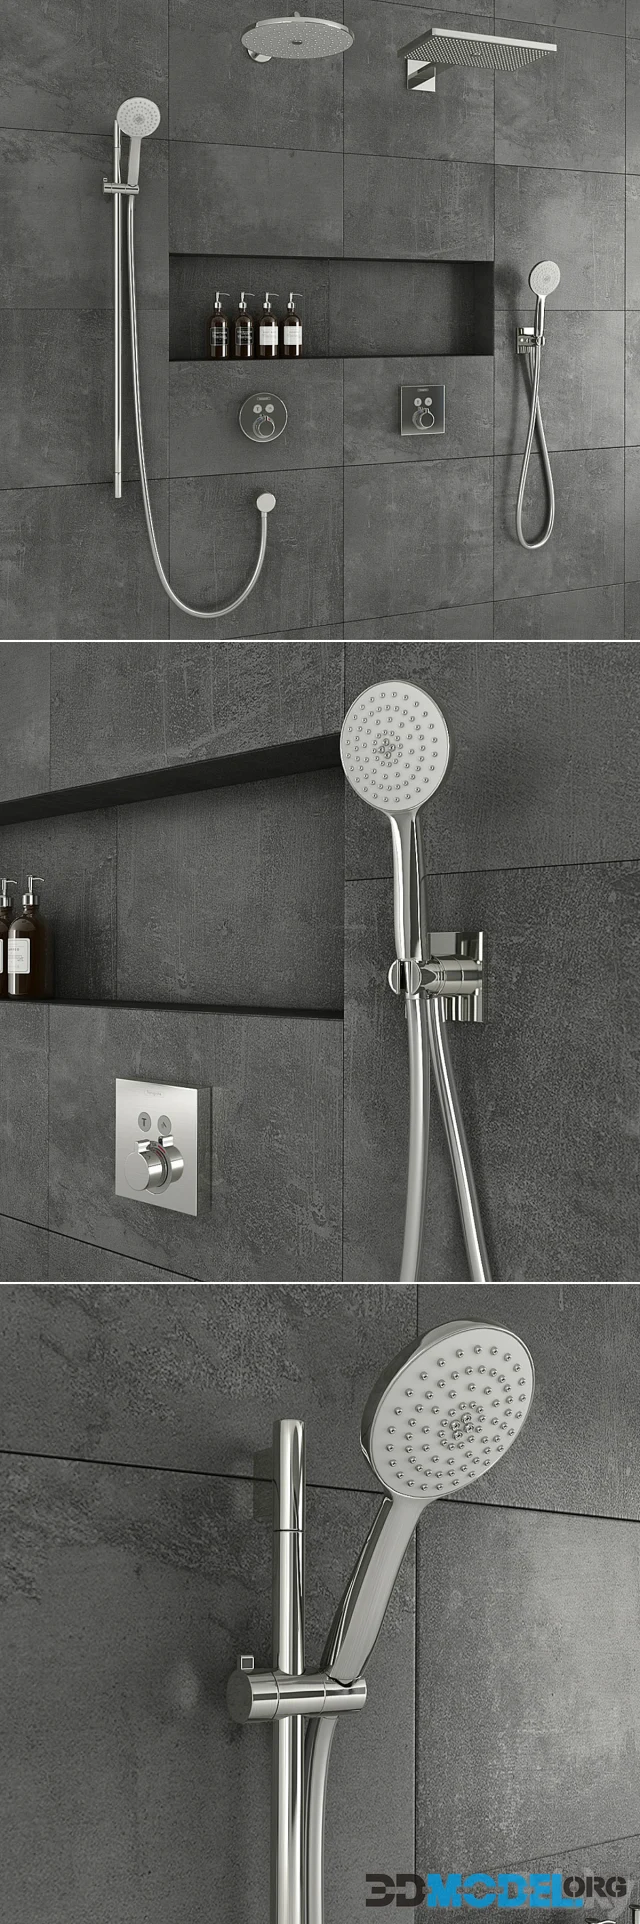 Hansgrohe shower system